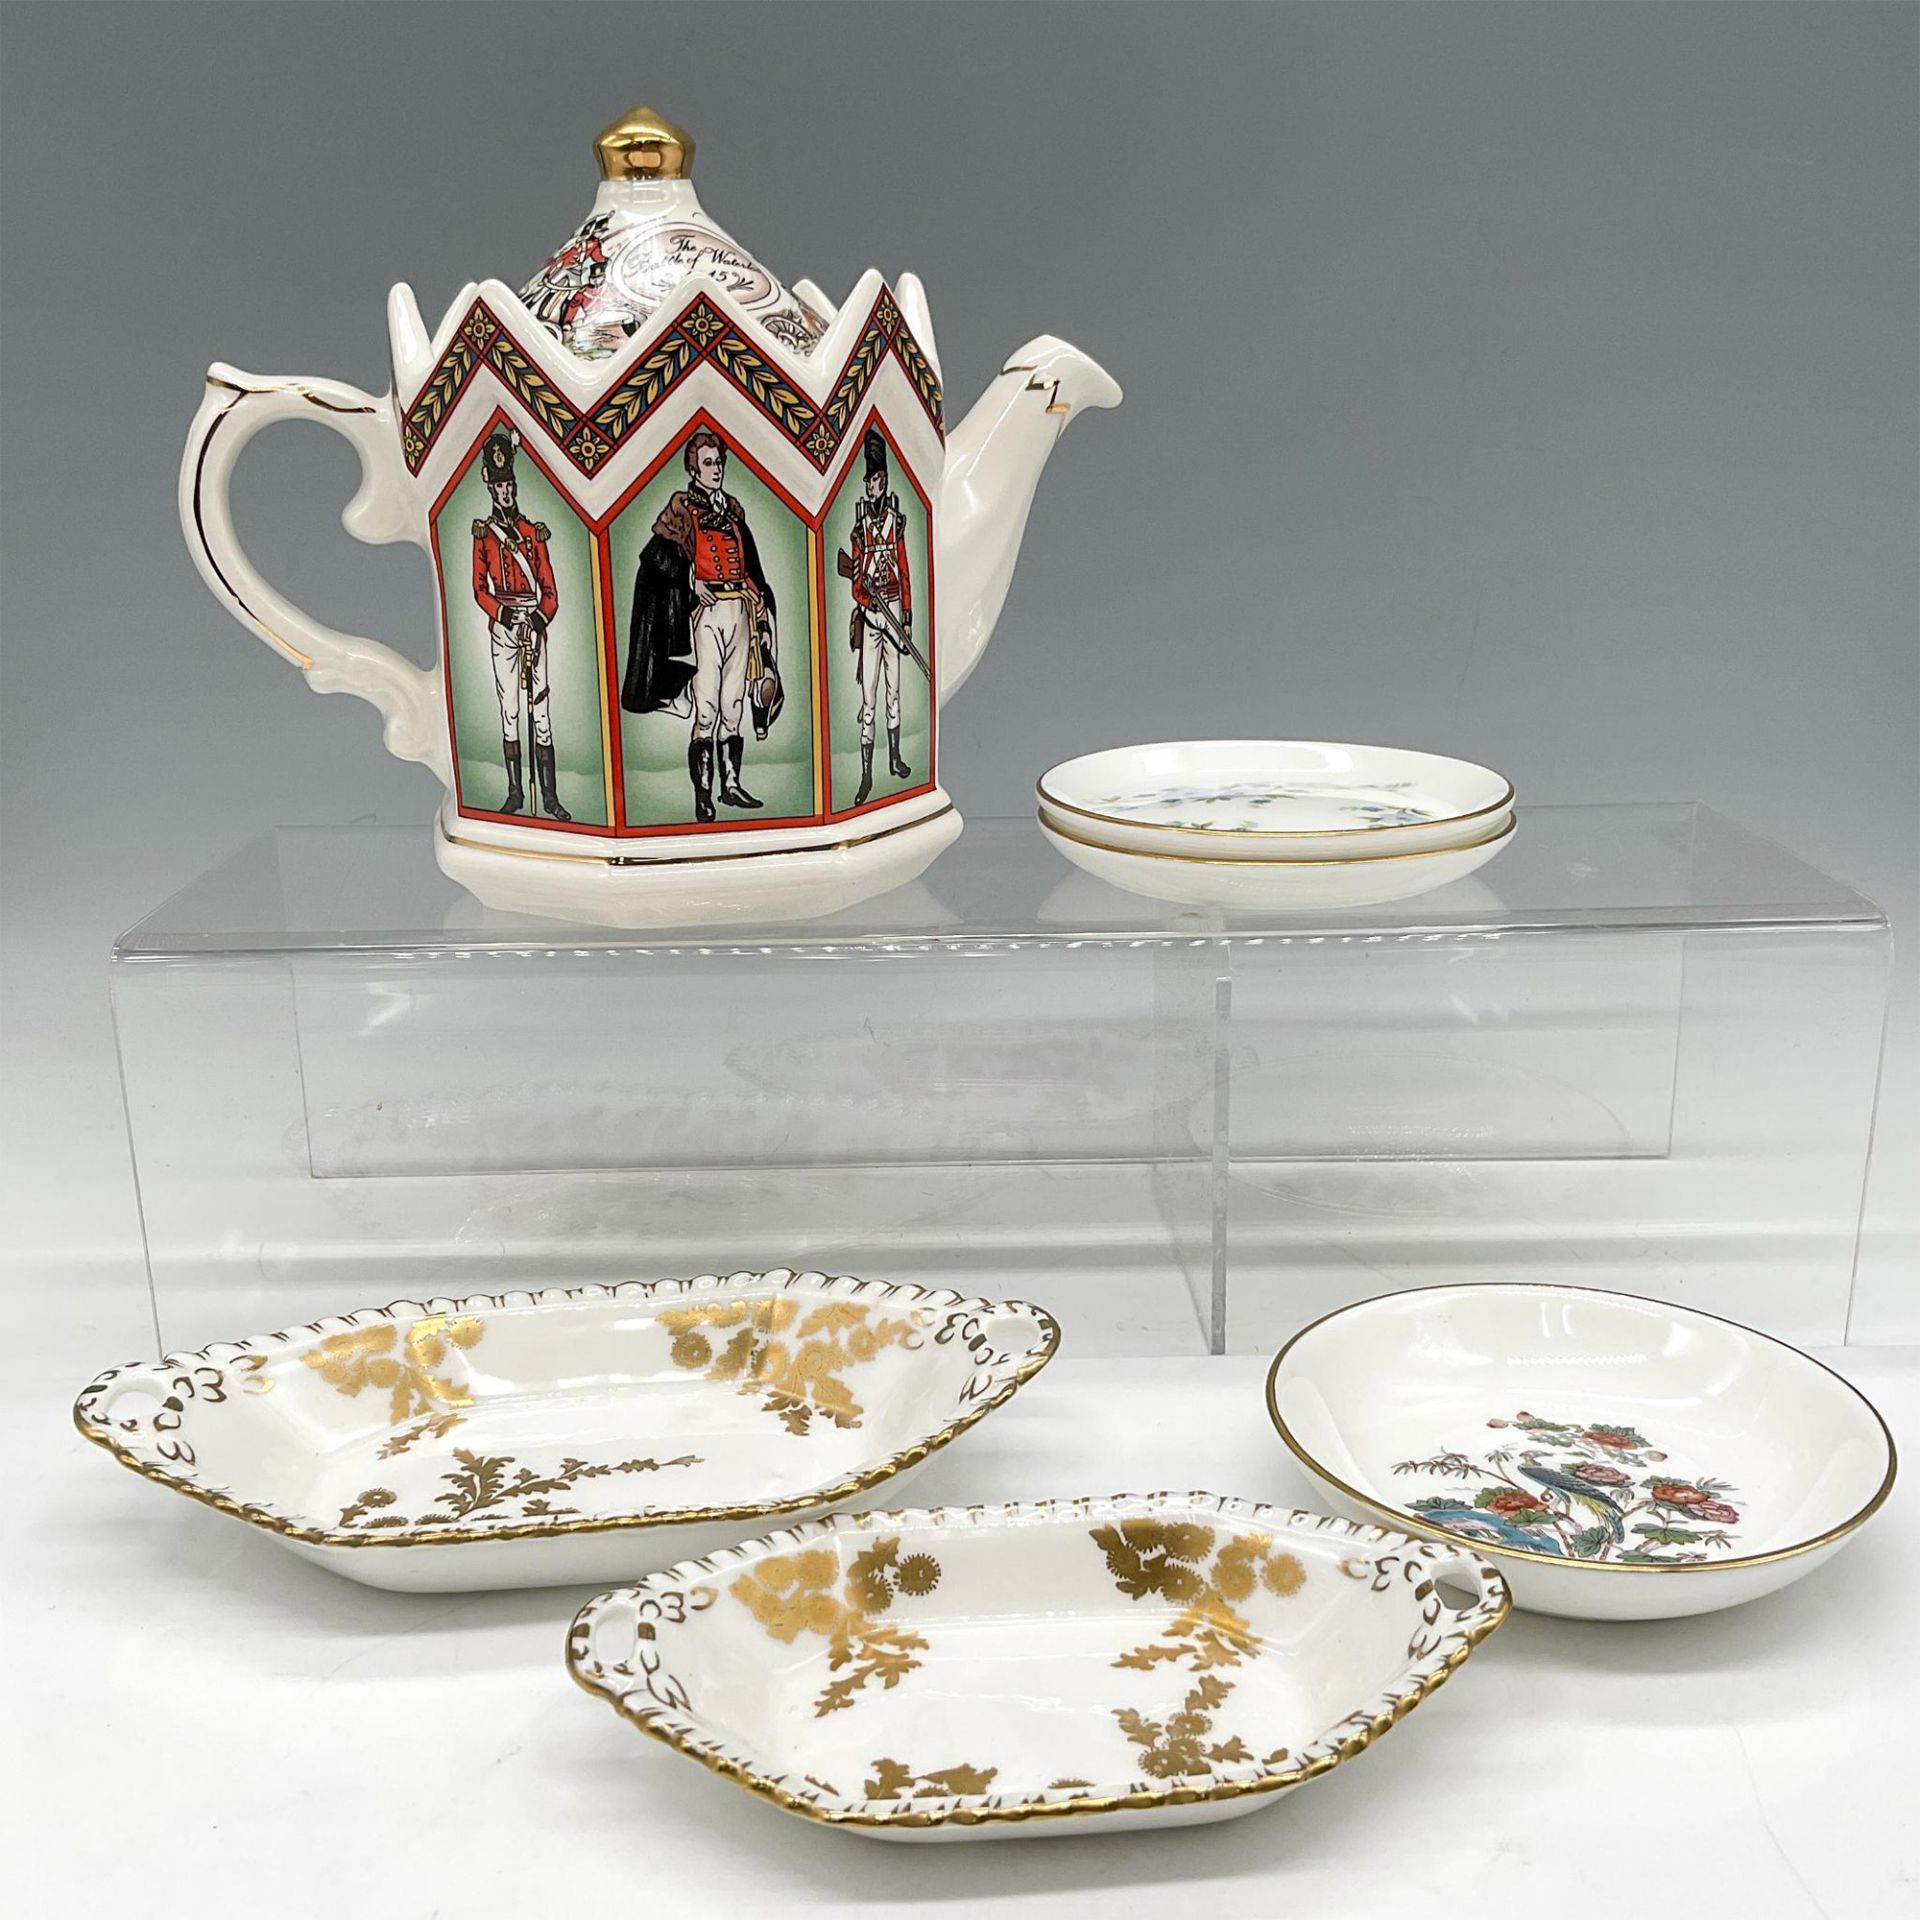 6pc English Porcelain and Bone China Teapot + Candy dishes